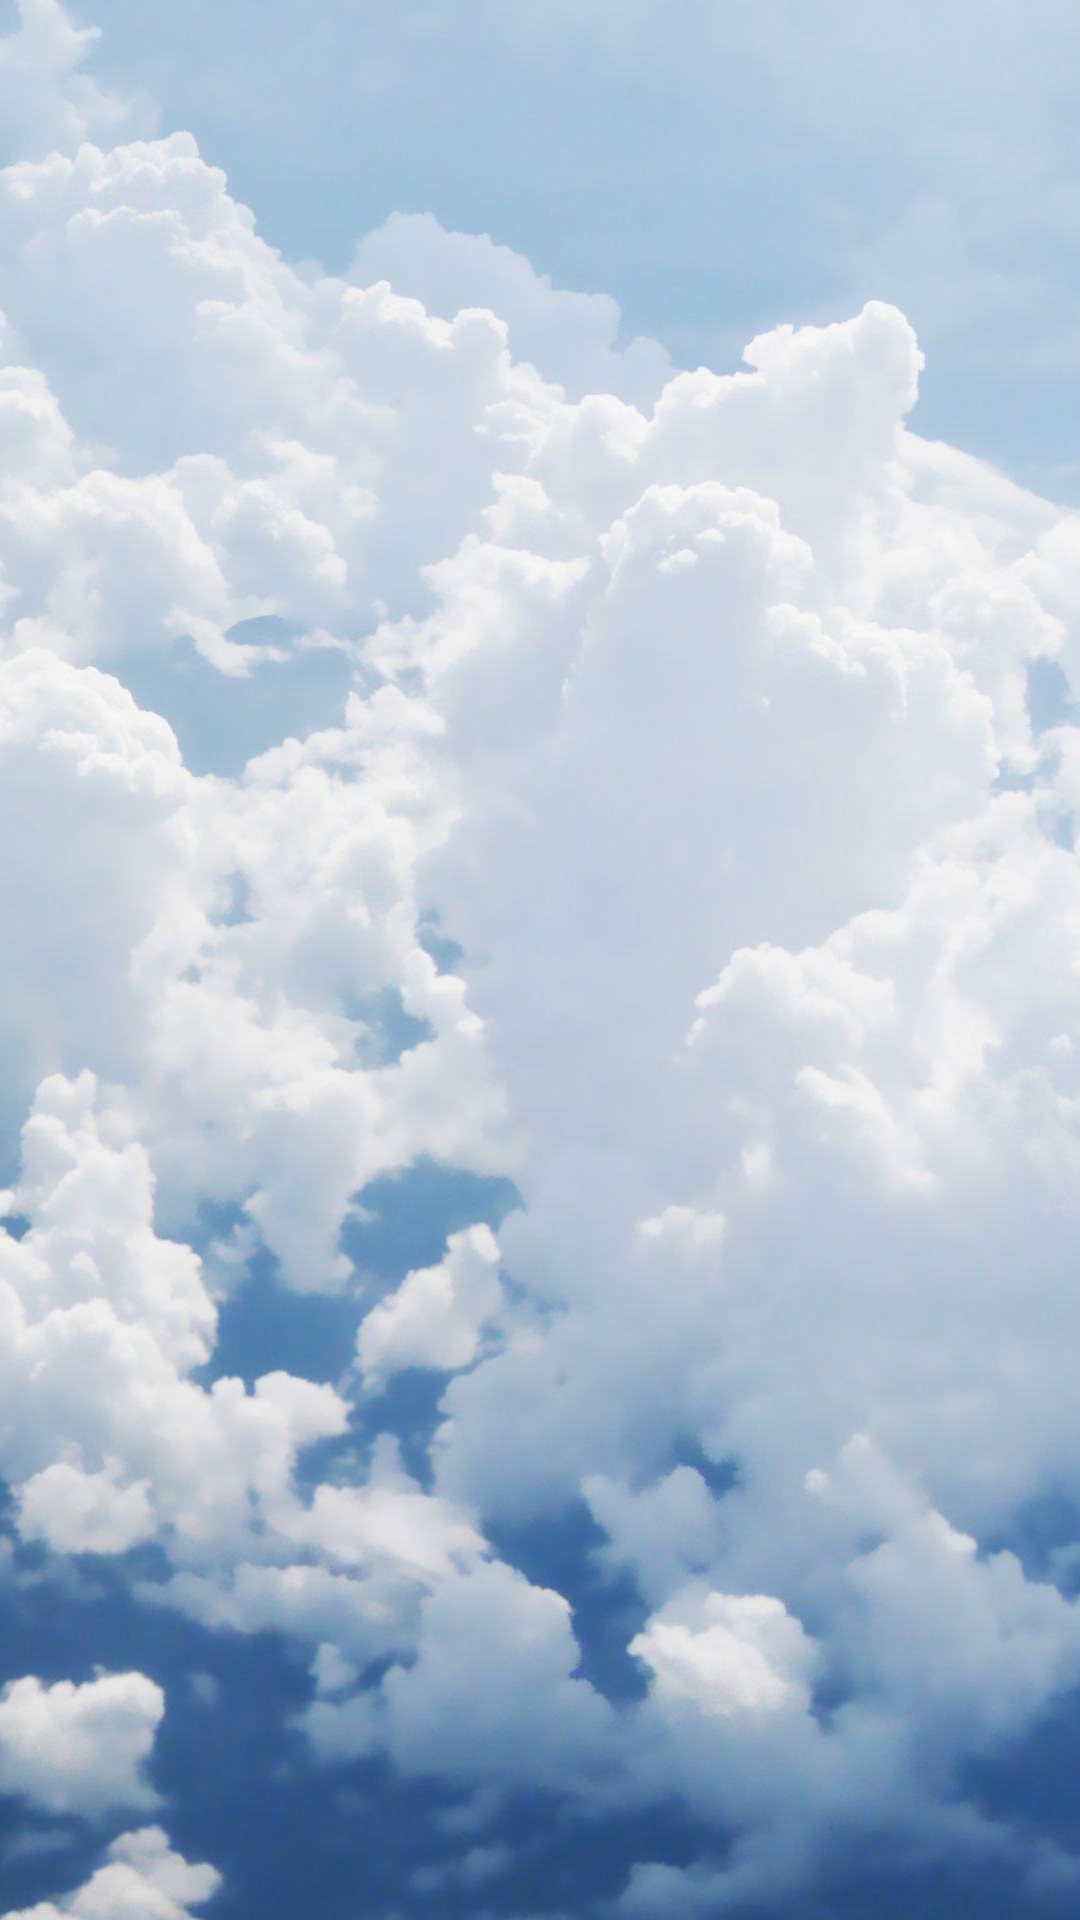 Iphone clouds wallpapers free download 